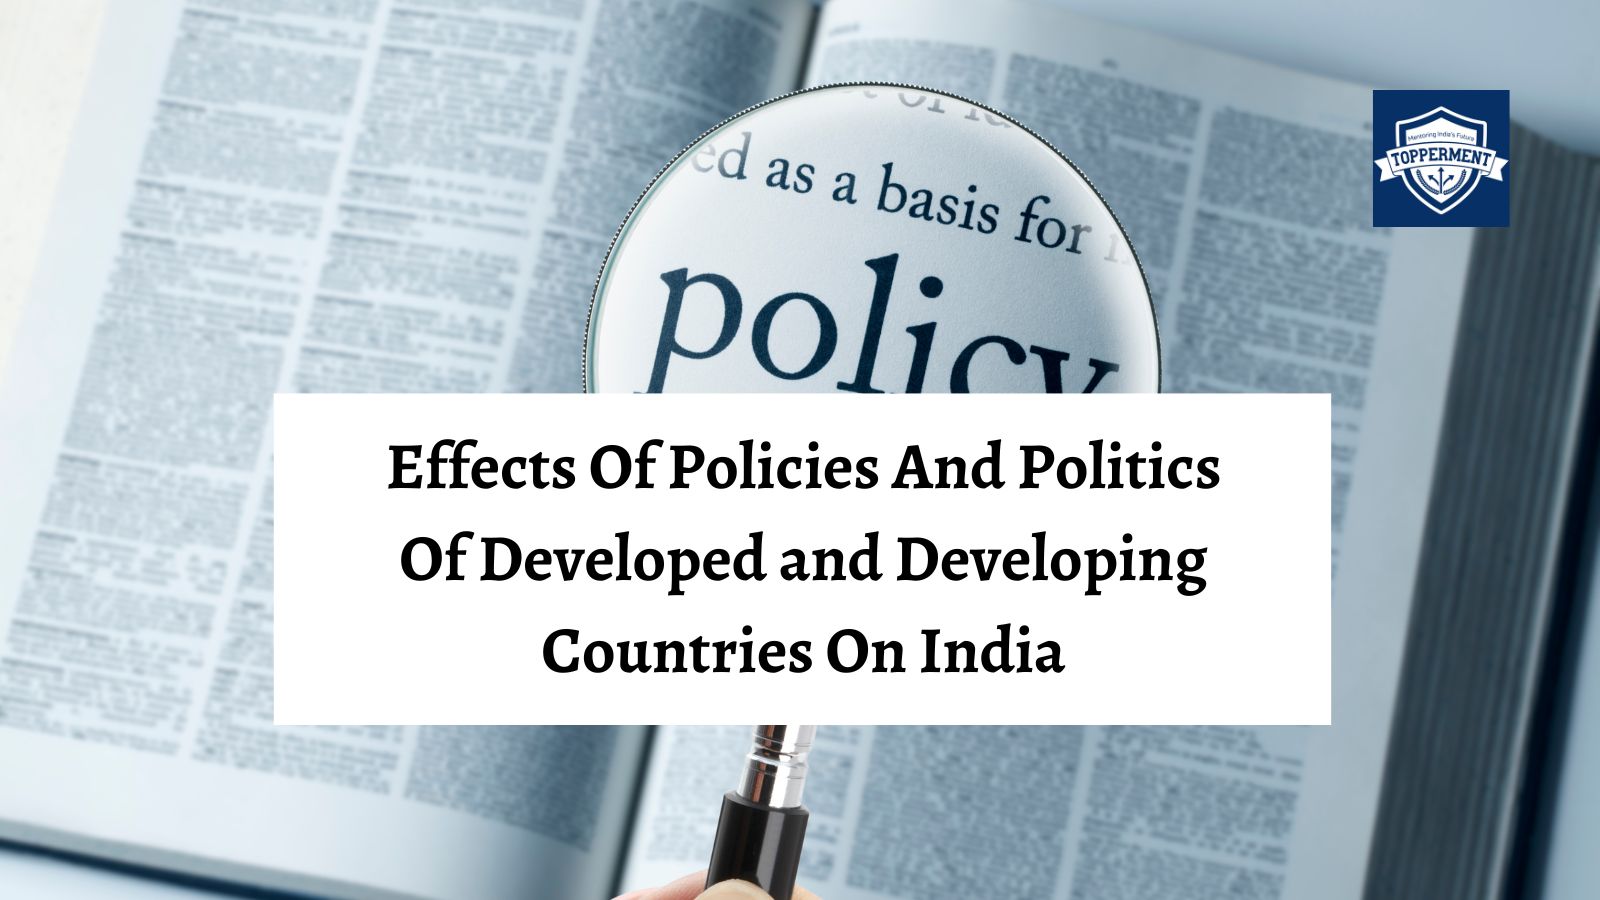 Effects of policies and politics of developed and developing countries on India's interests | Best UPSC IAS Coaching For Mentorship And Guidance